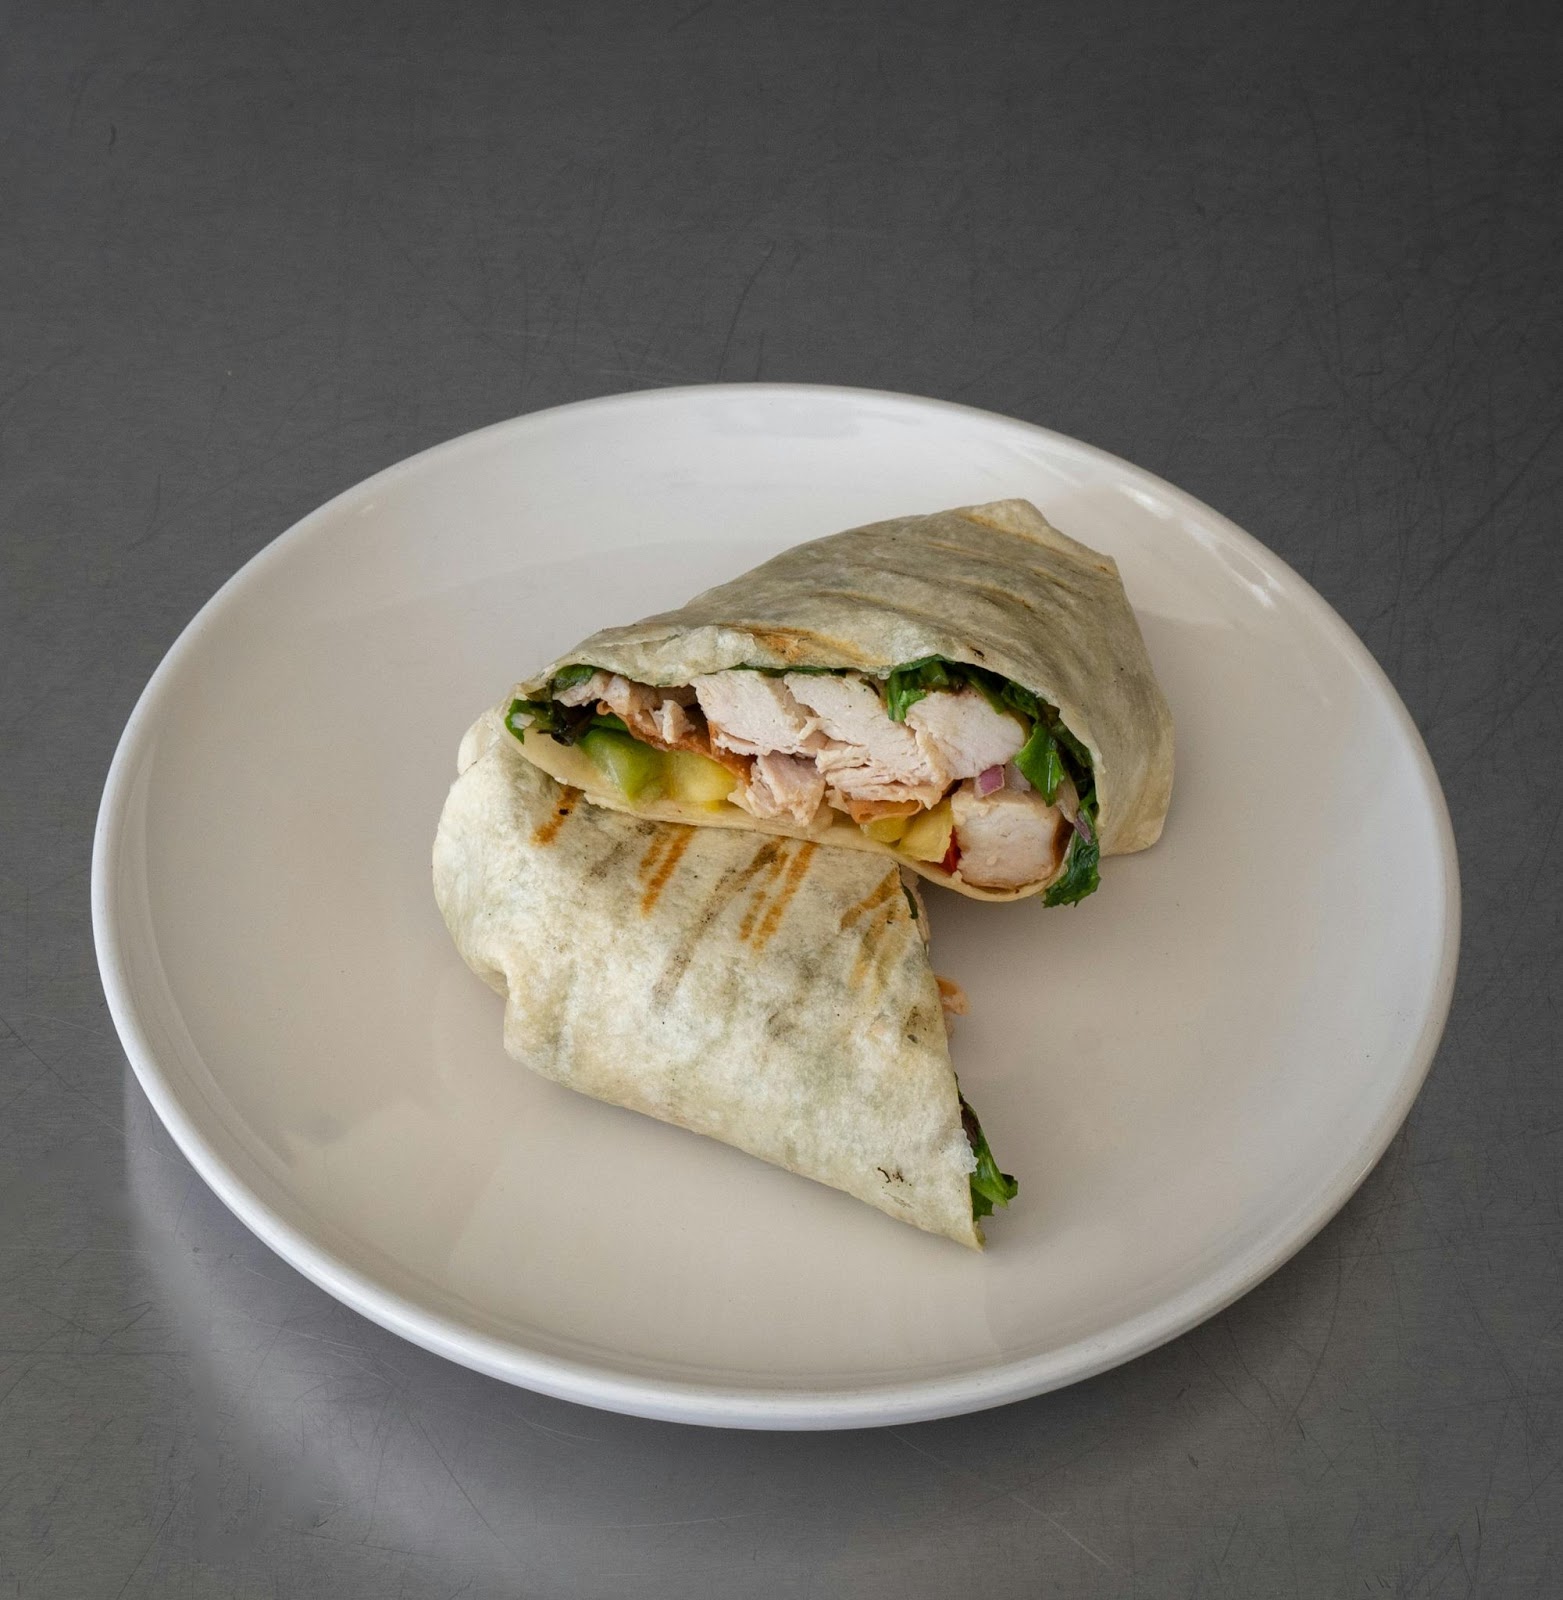 A chicken and avocado wrap on a plate